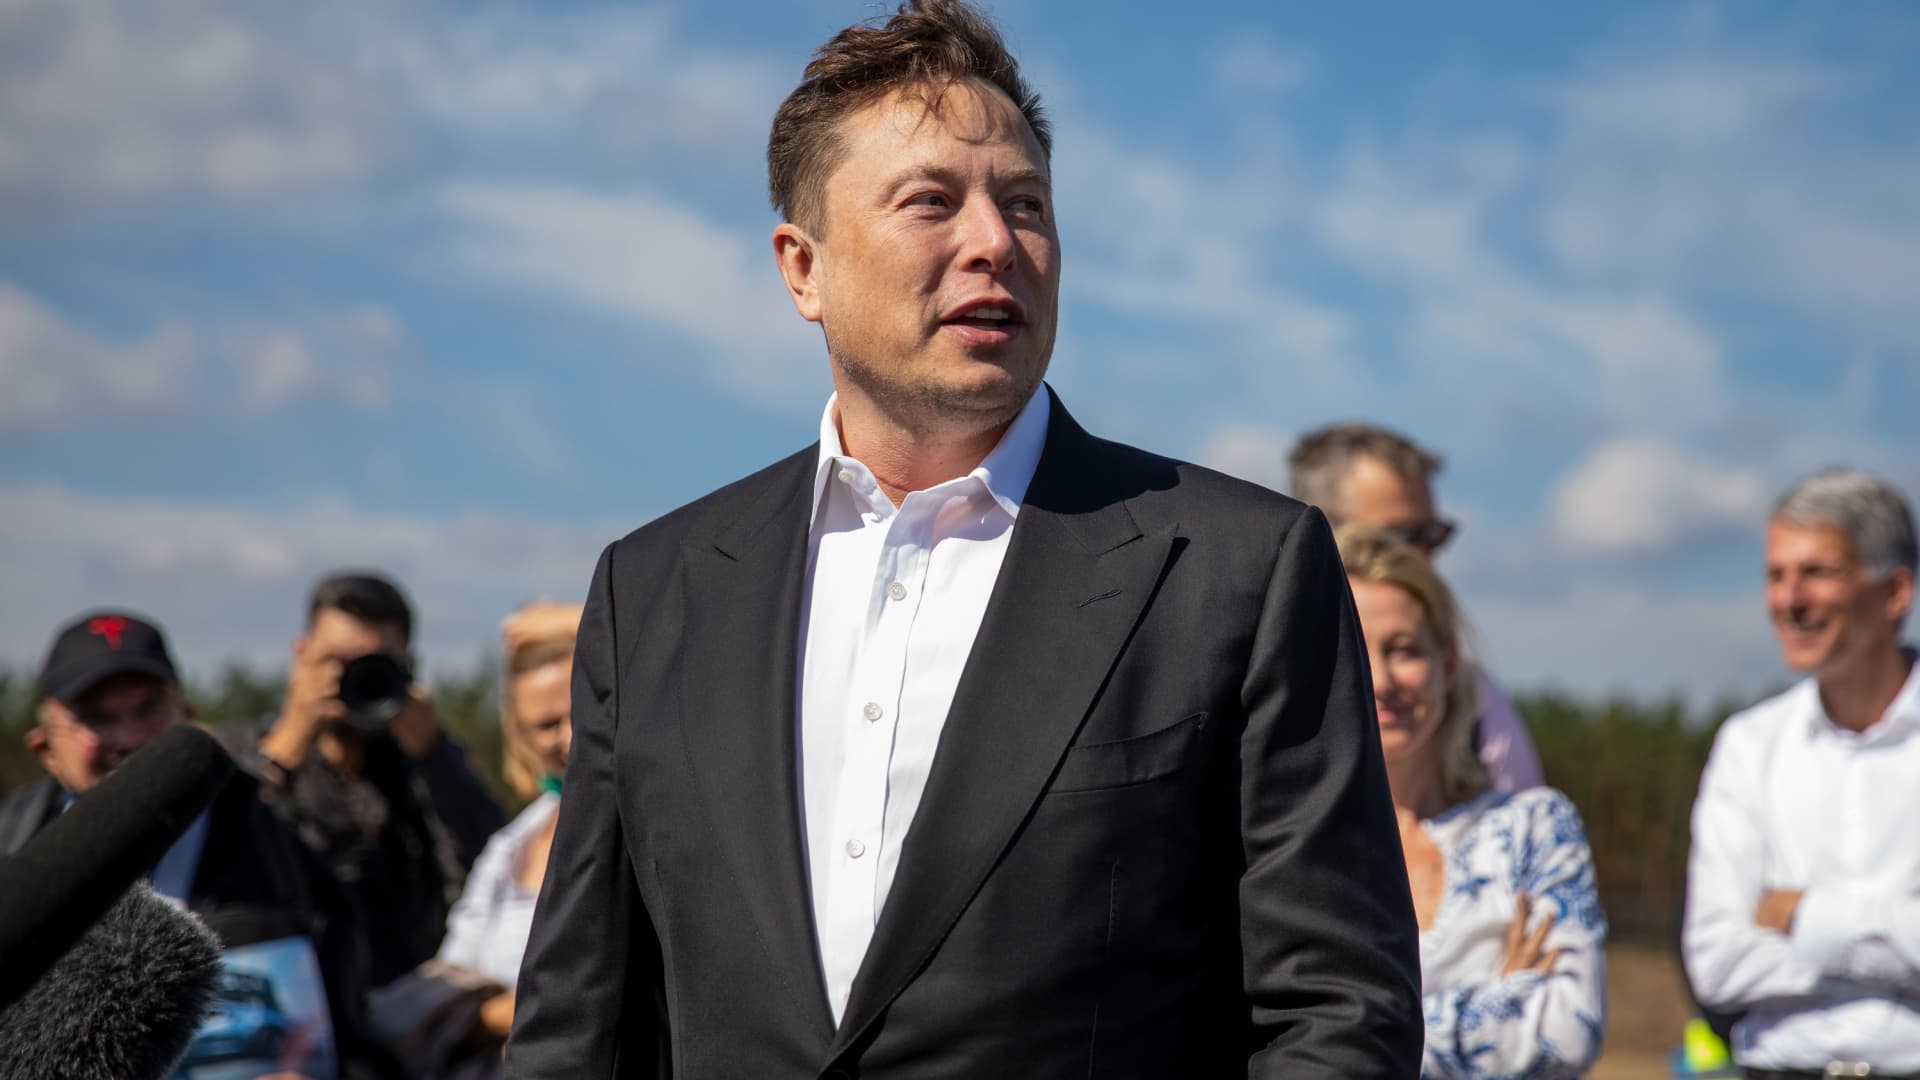 Elon Musk will be most indebted CEO in America if Twitter deal closes